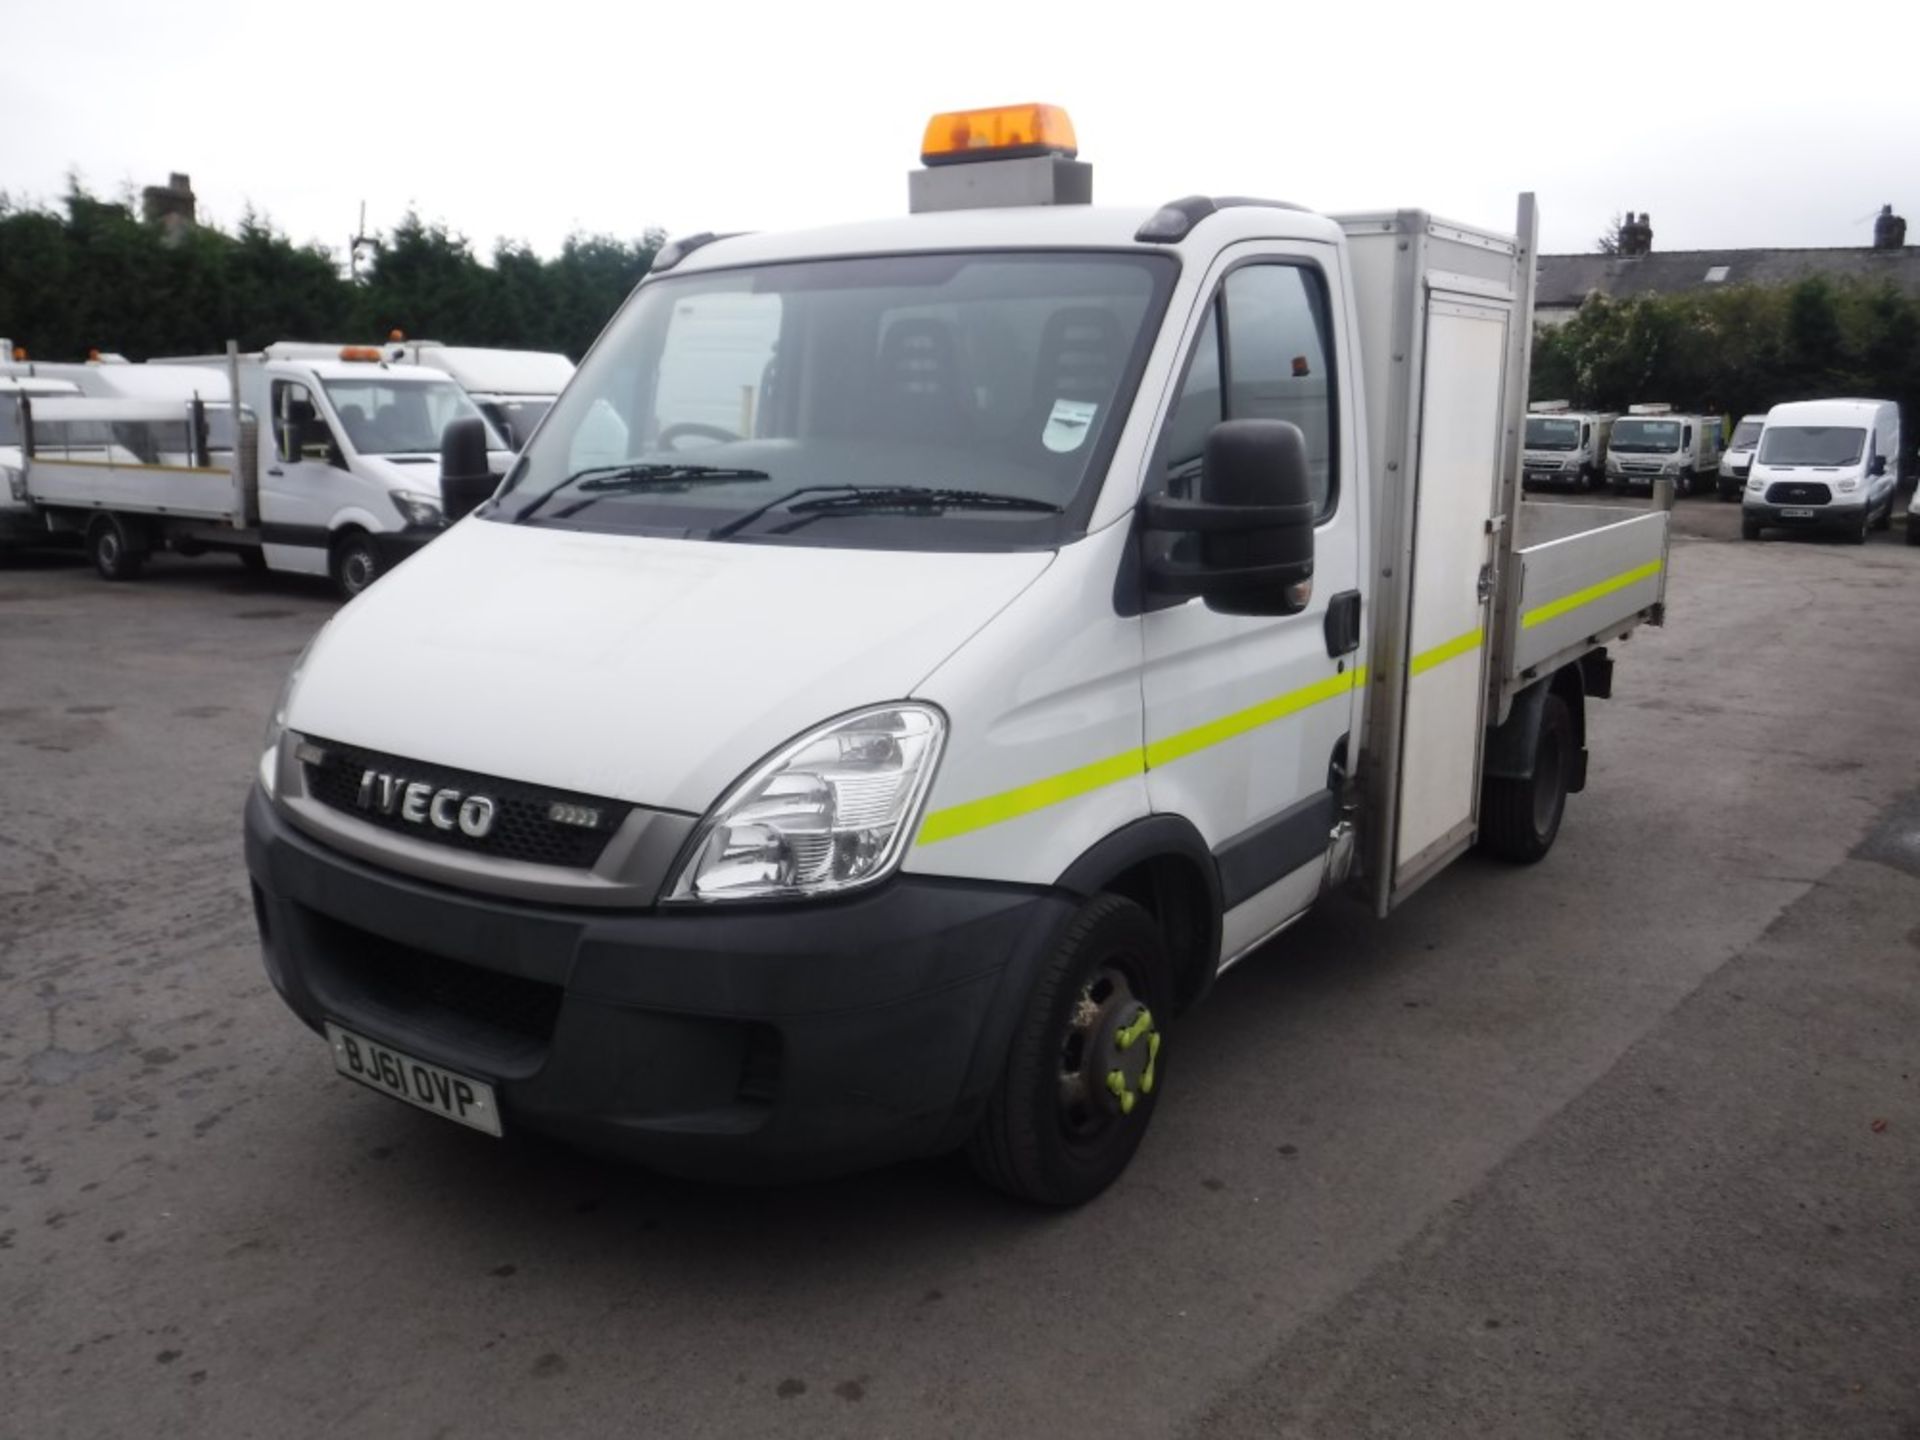 61 reg IVECO DAILY 35C15 MWB TIPPER (DIRECT COUNCIL) 1ST REG 10/11, 38285M, V5 HERE, 1 OWNER FROM - Image 2 of 5